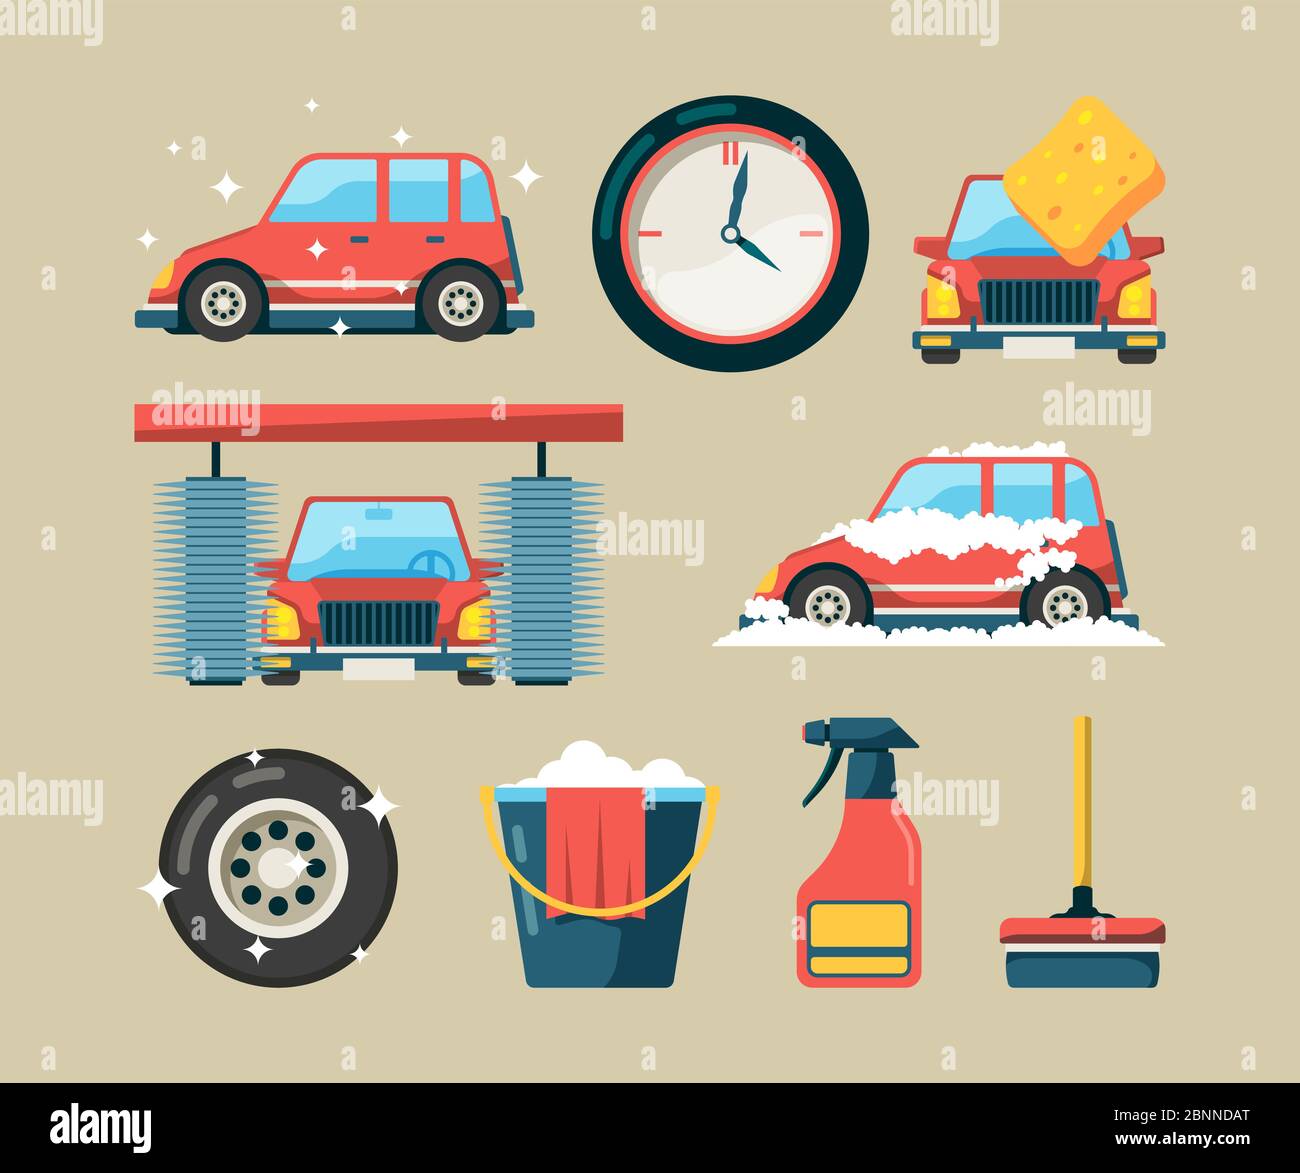 Car wash icon set. Foam roller washing machines cleaning auto service vector cartoon symbols isolated Stock Vector